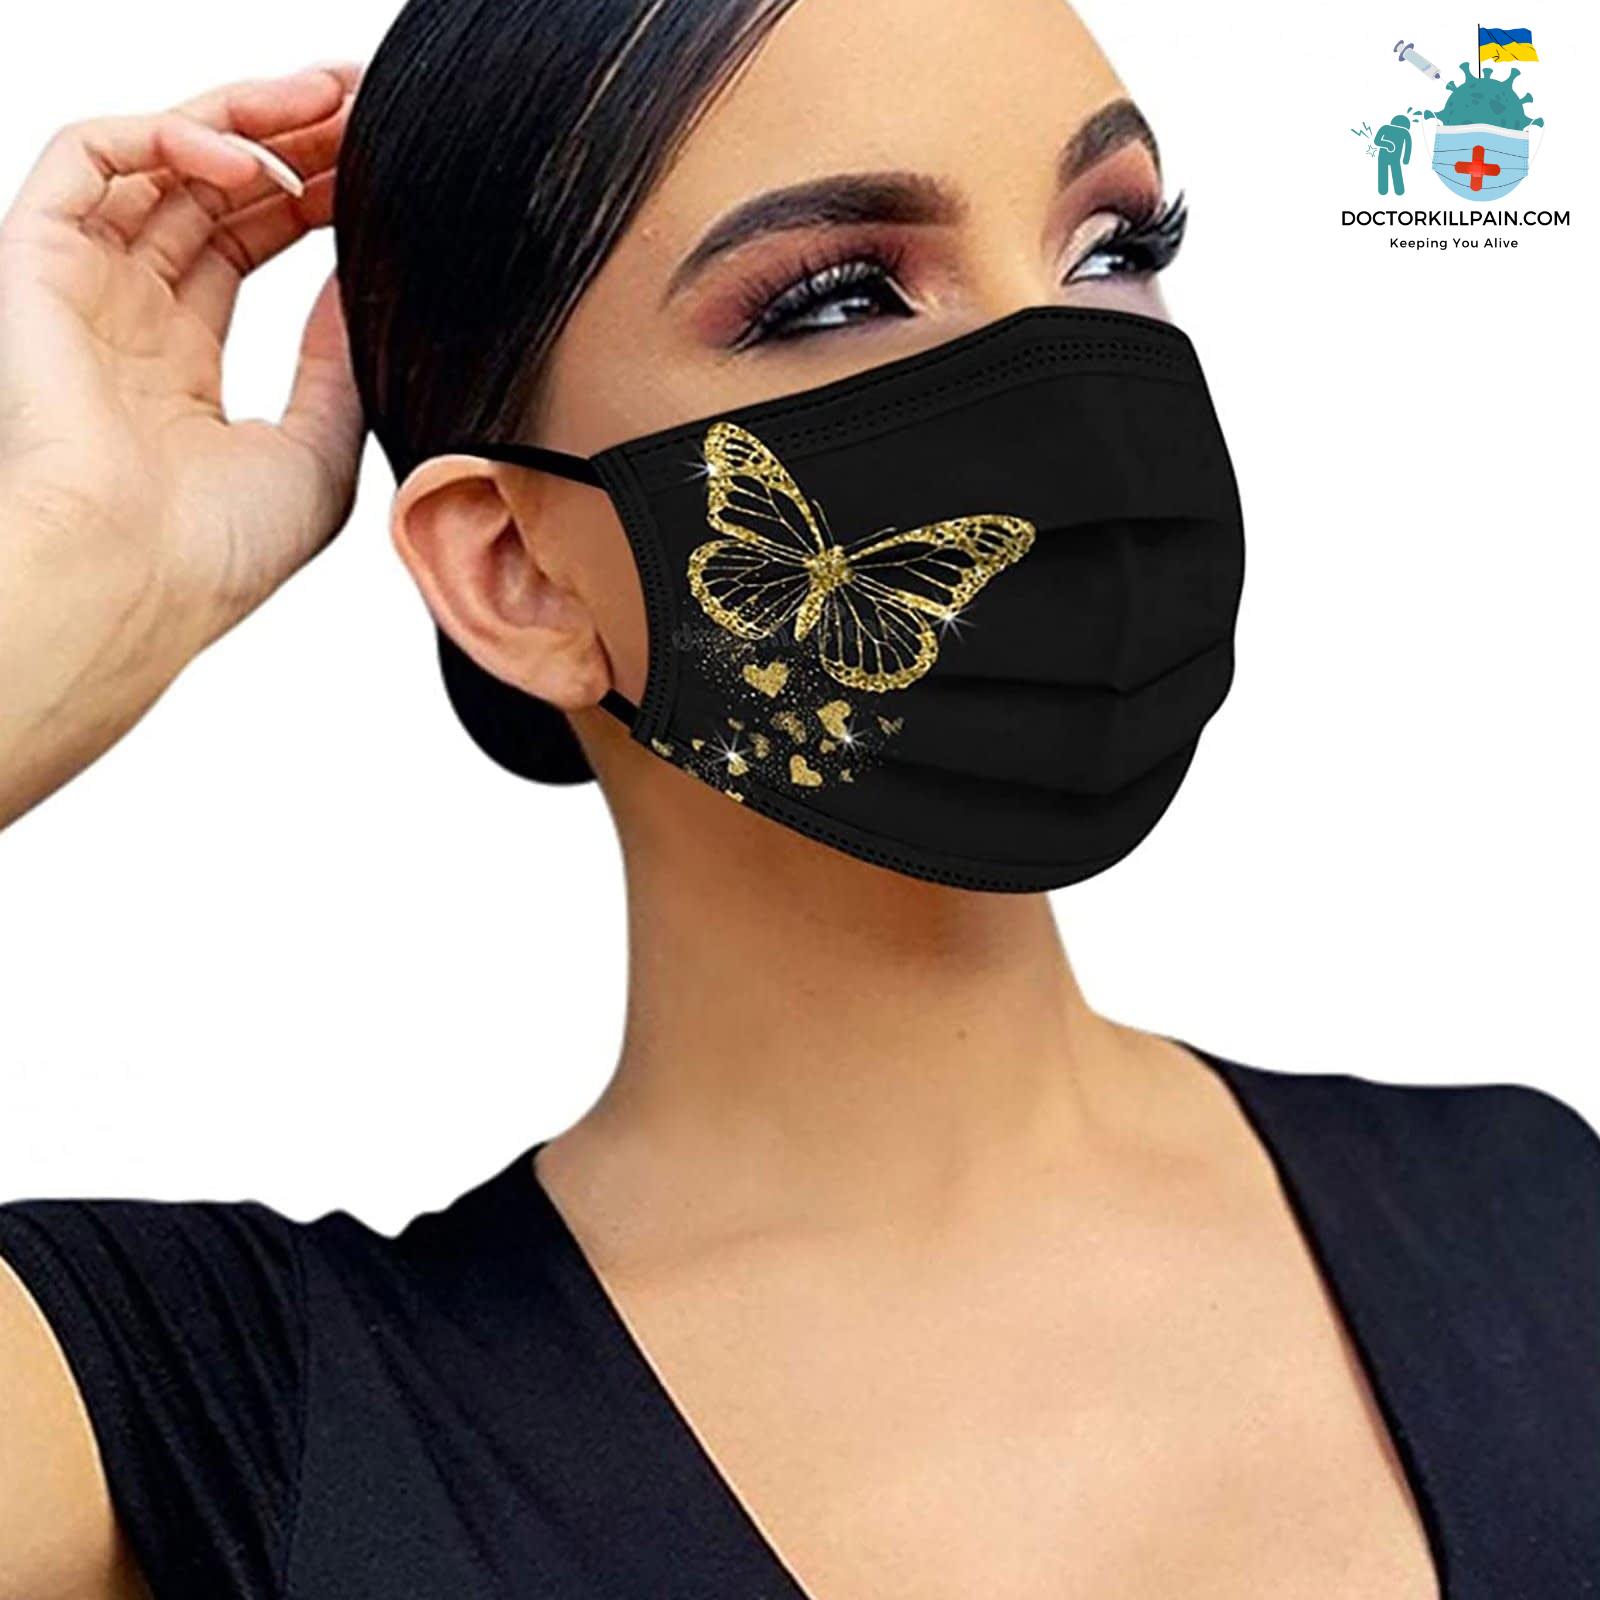 Adult Face Mask. 50pc Disposable Masks Butterflies Mask for Women Fashion Covers Fashion Mouths 3-ply Proteccion Face Masks Halloween Cosplay